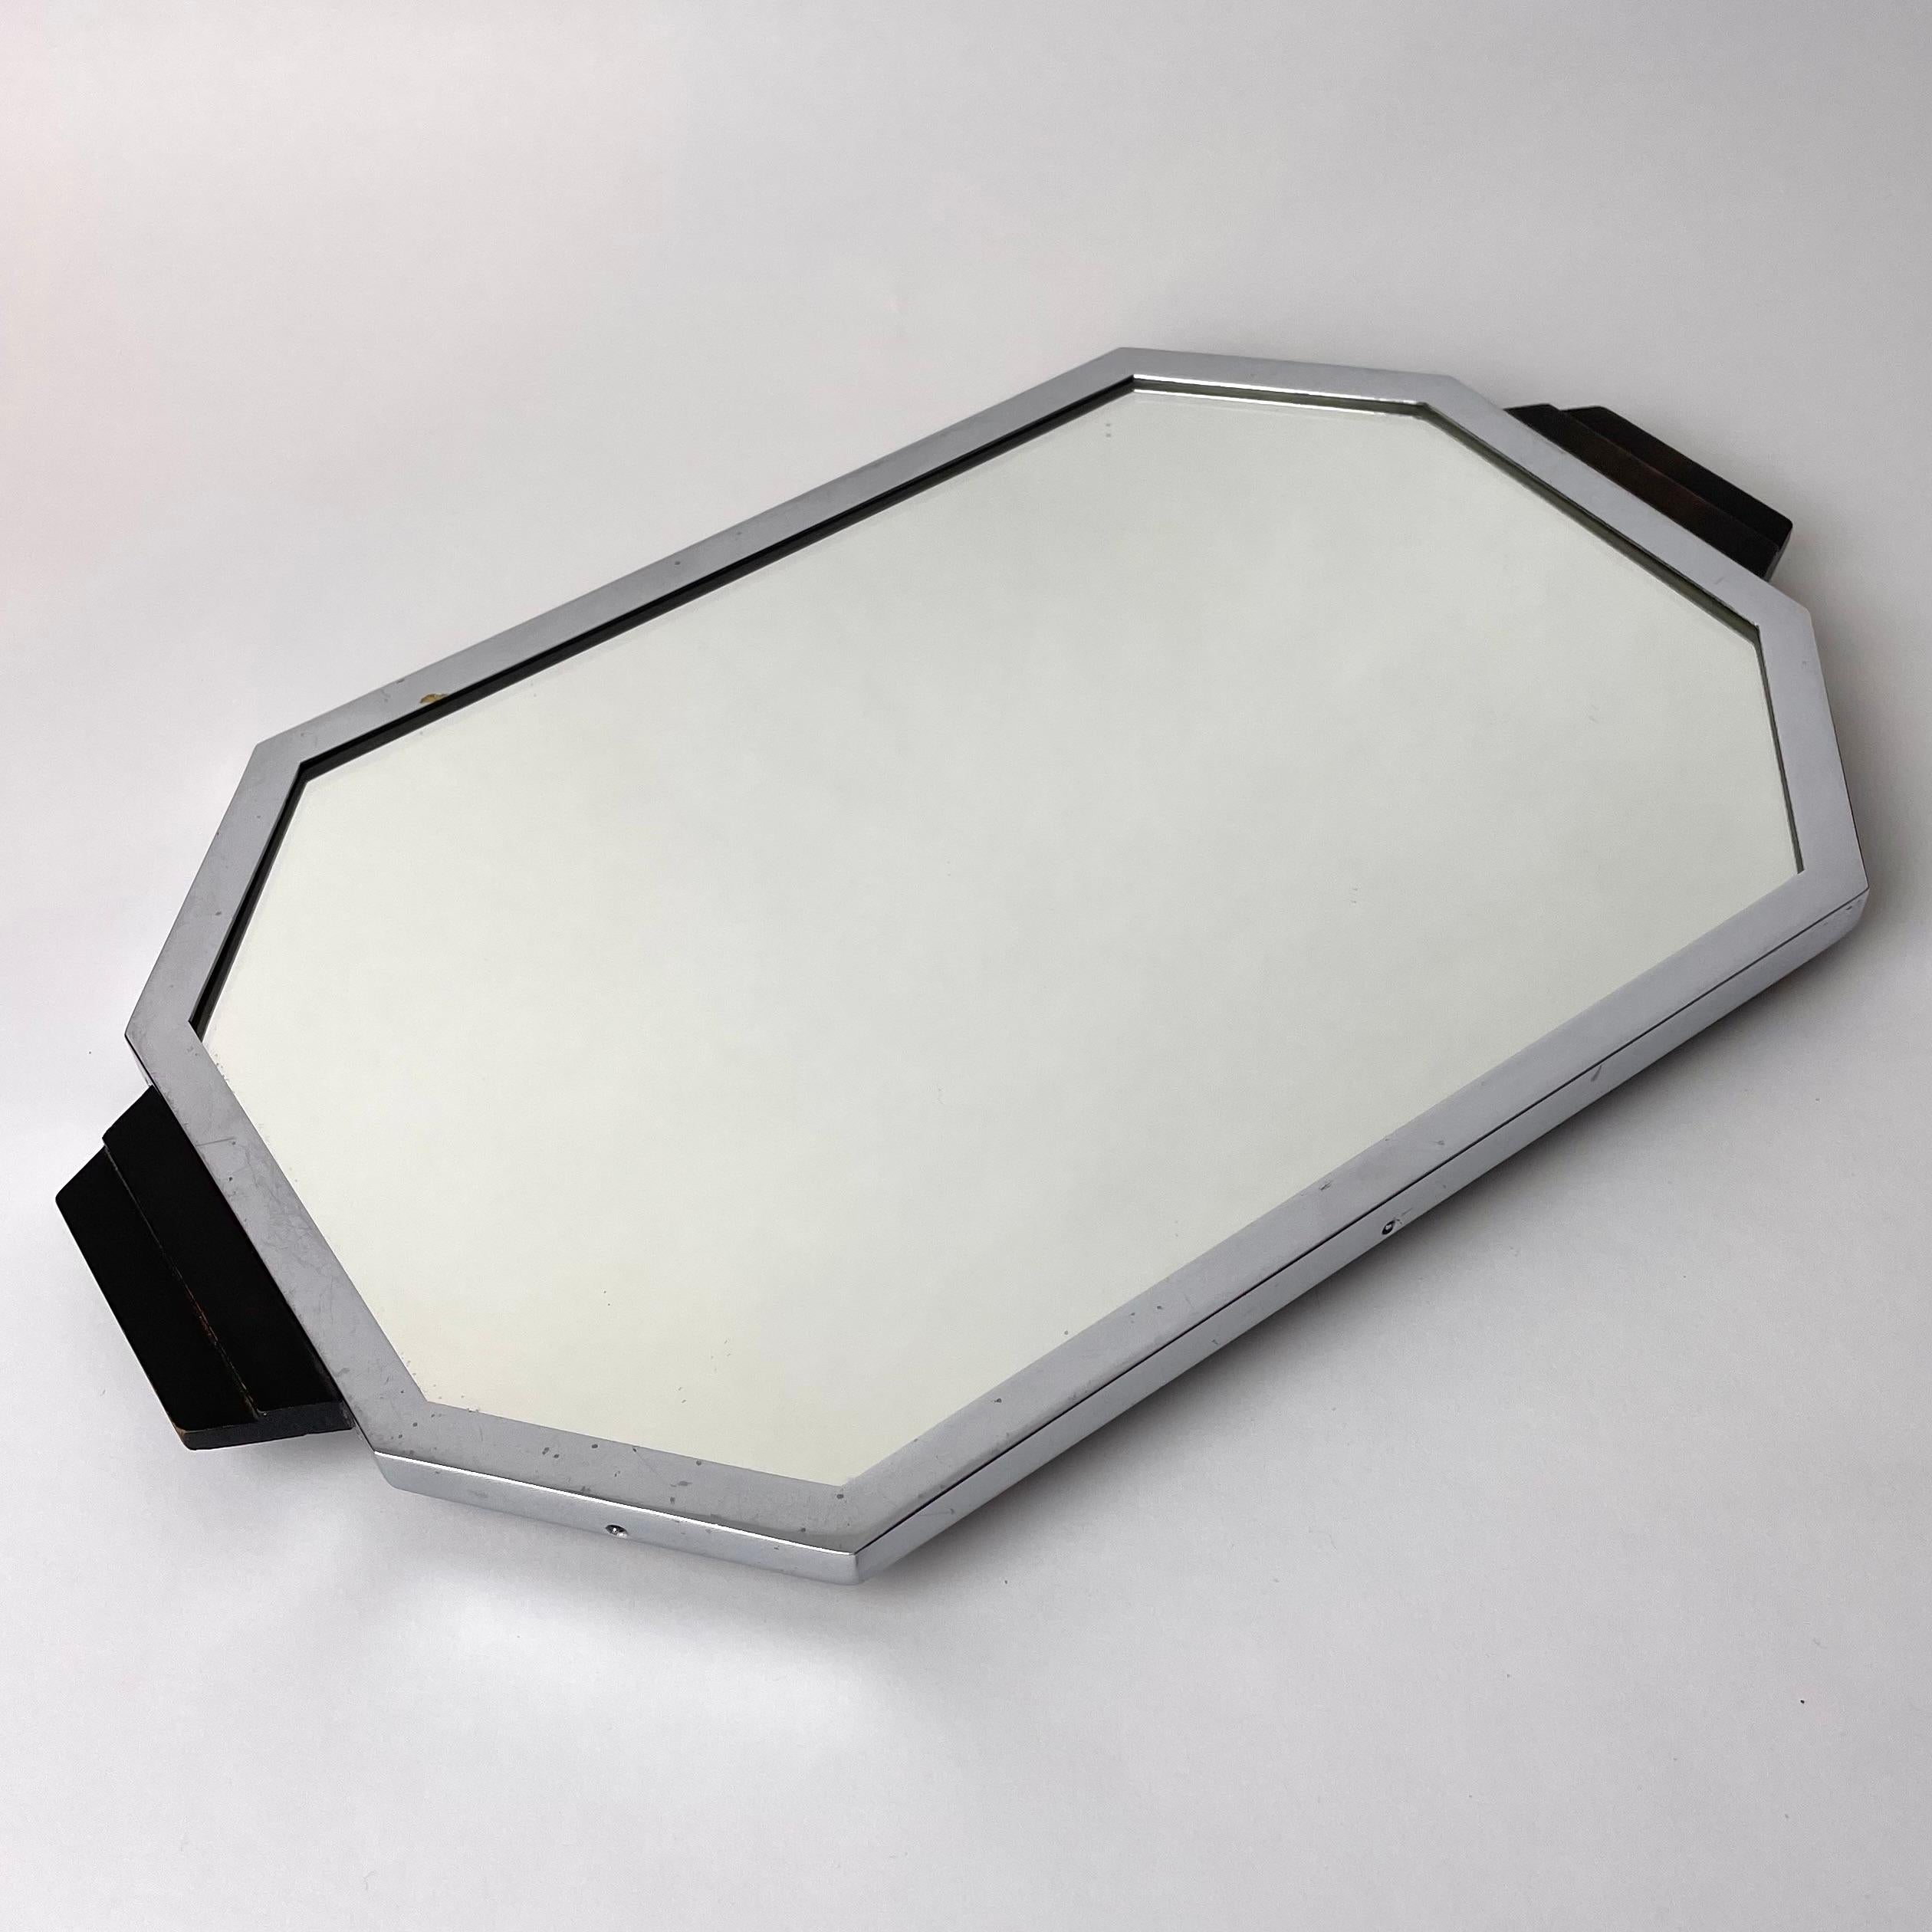 An Elegant Art Deco Tray in Chrome and Blackened Wood with Mirror Glass, 1920s.

This elegant and refined chrome and mirror tray with blackened wood handles reflect the sensibilities and aesthetic interests of the Art Deco period. Modern materials